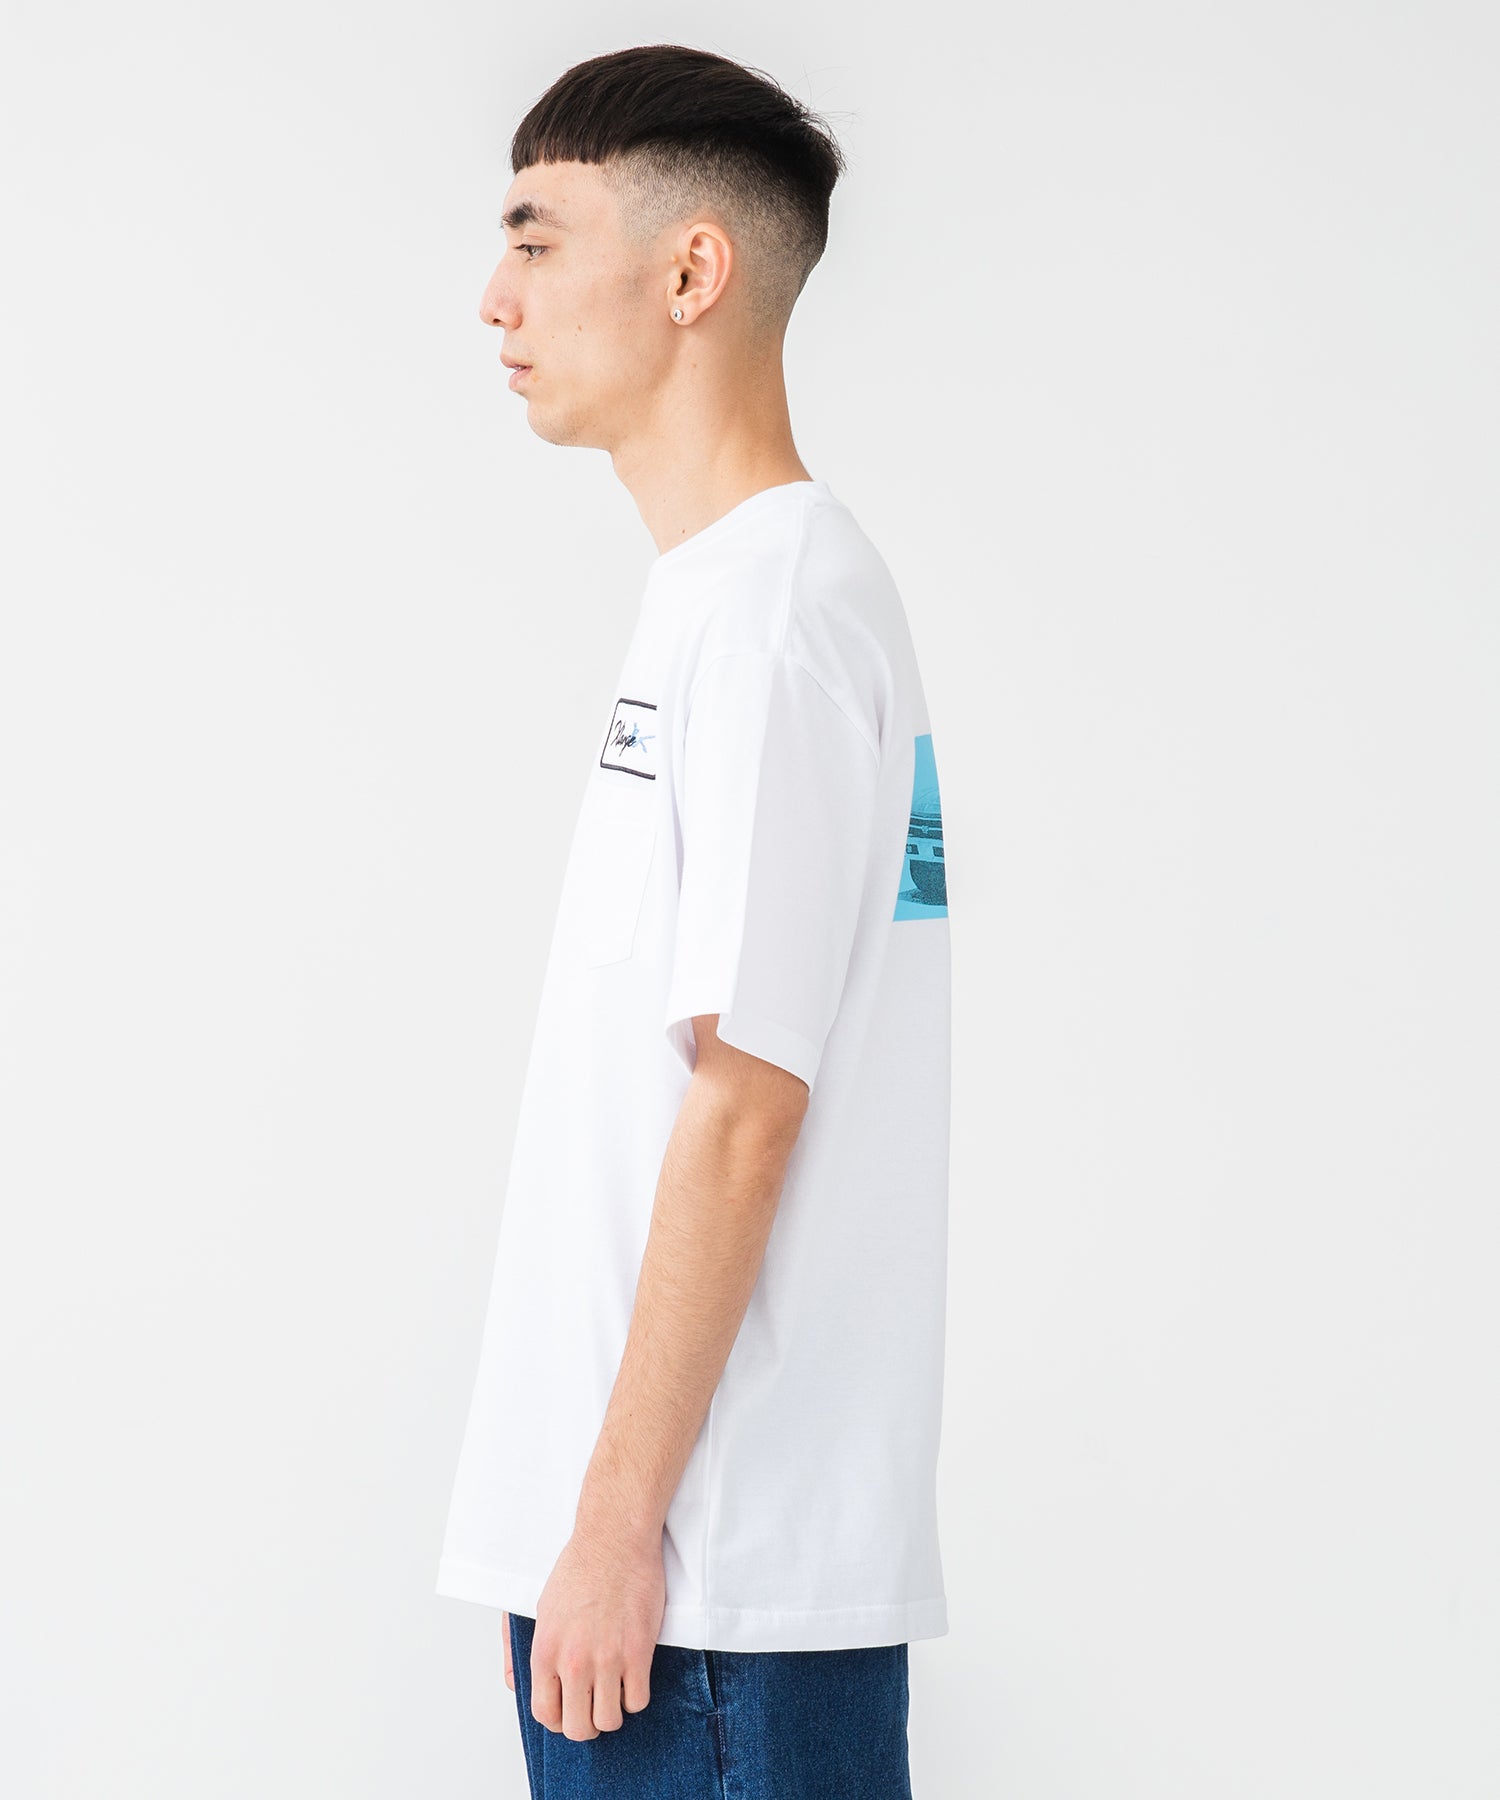 S/S PATCH POCKET TEE T-SHIRT XLARGE  